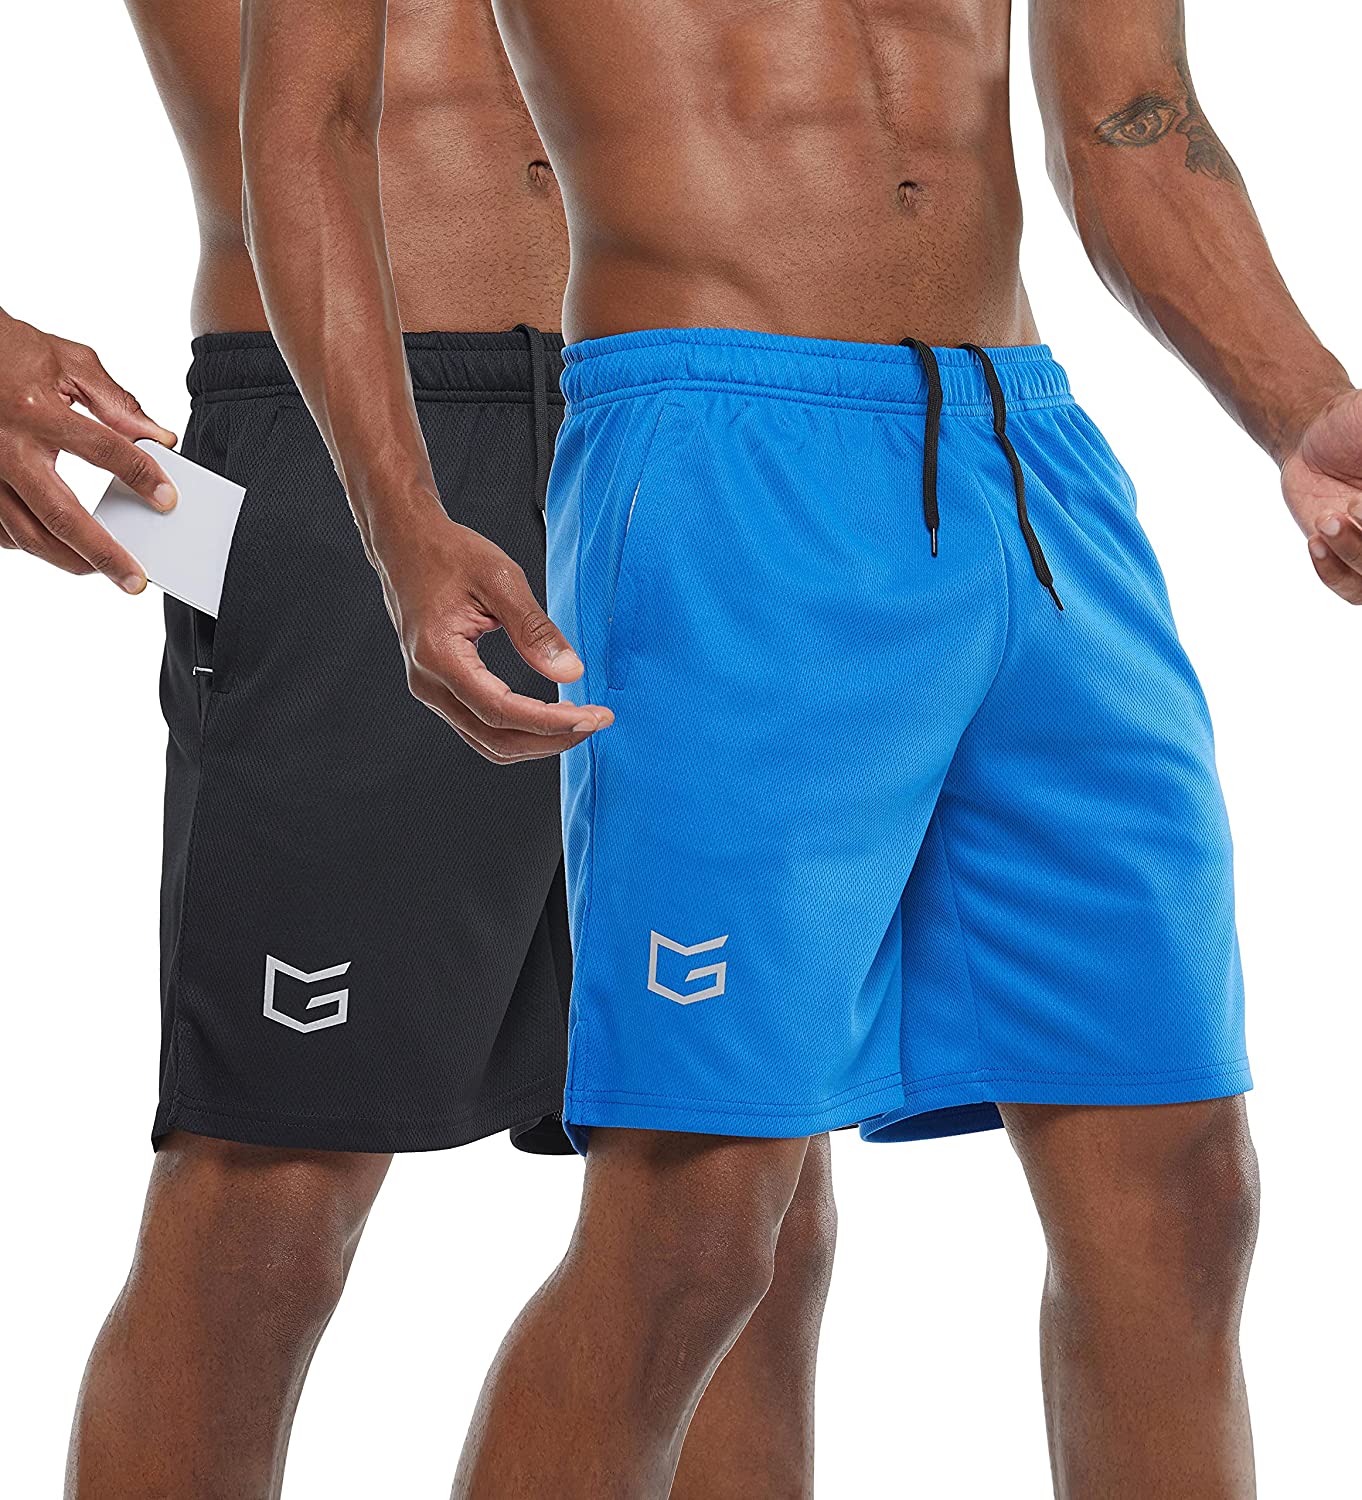 G Gradual Men's 3'' Running Shorts Gym Quick Dry Athletic Workout